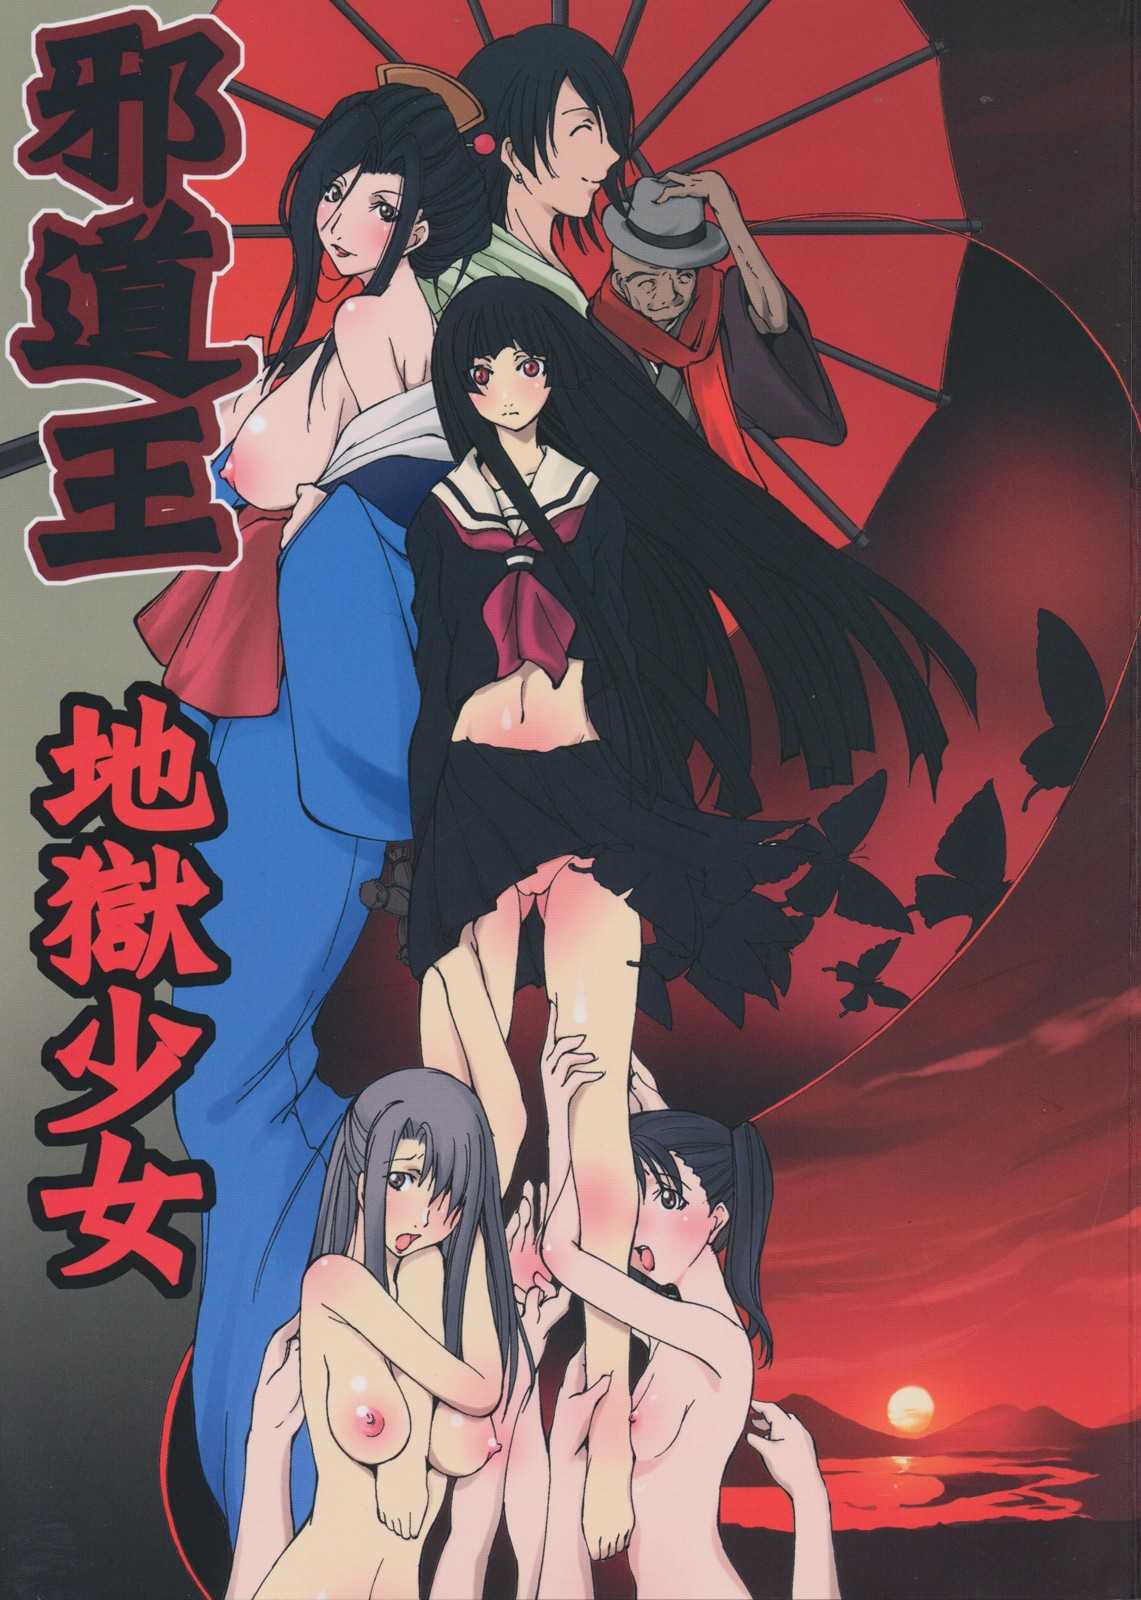 [Arugoragunia] Evil course hollow hell promotion {Hell Girl} {Full Color} {masterbloodfer} 